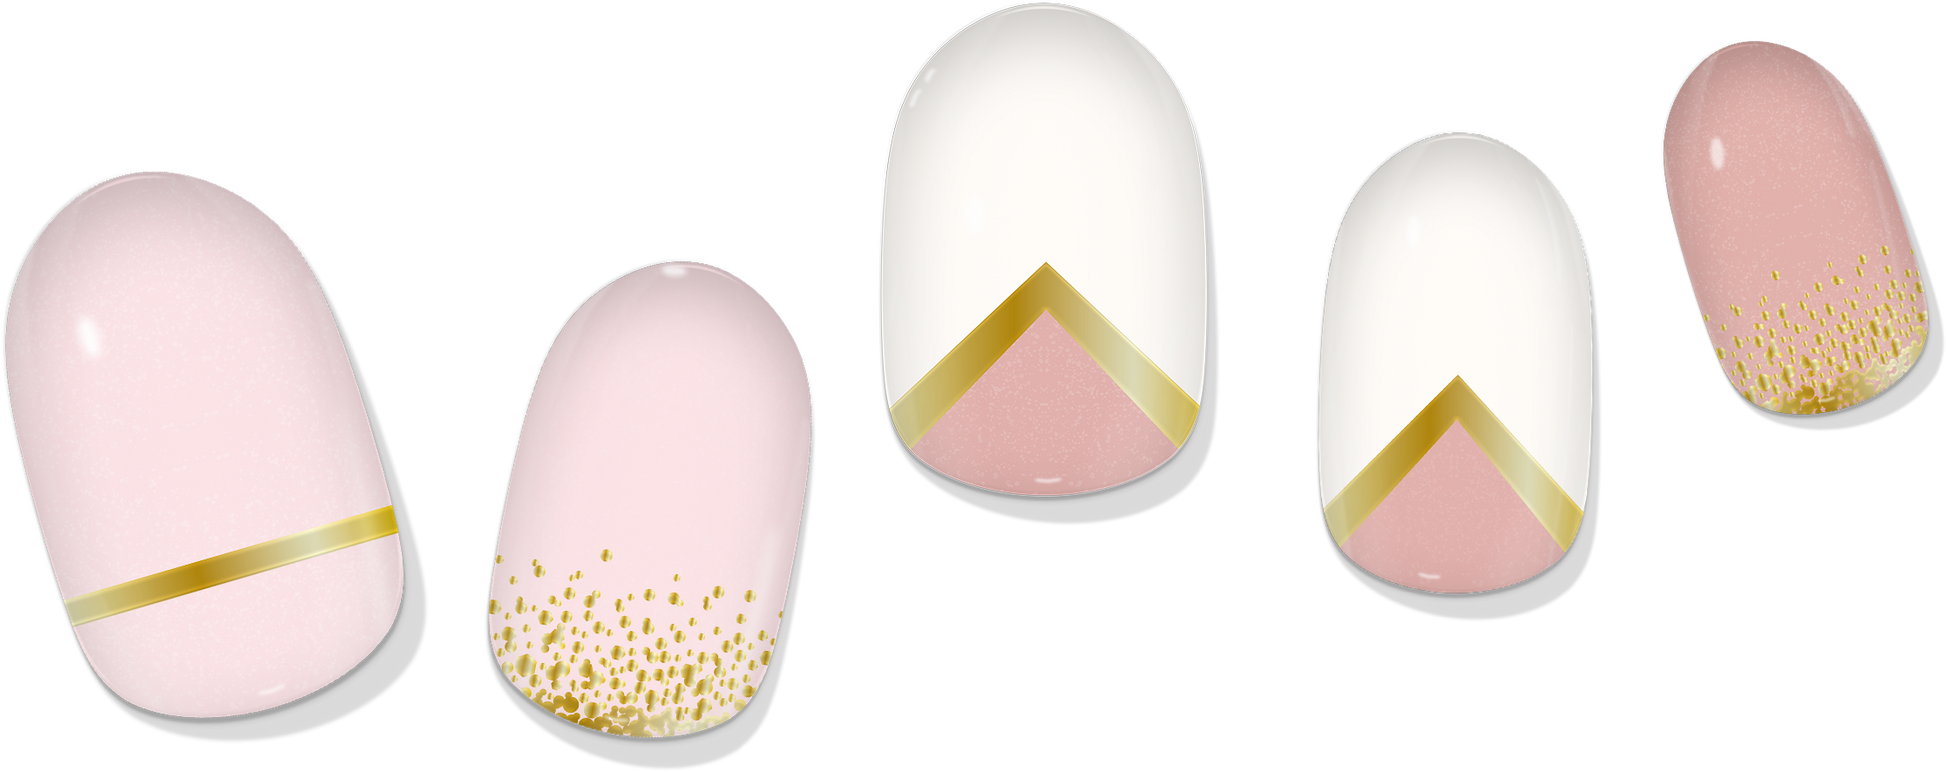 Buy Golden Nail Polish Online at Best Price - Iba Cosmetics